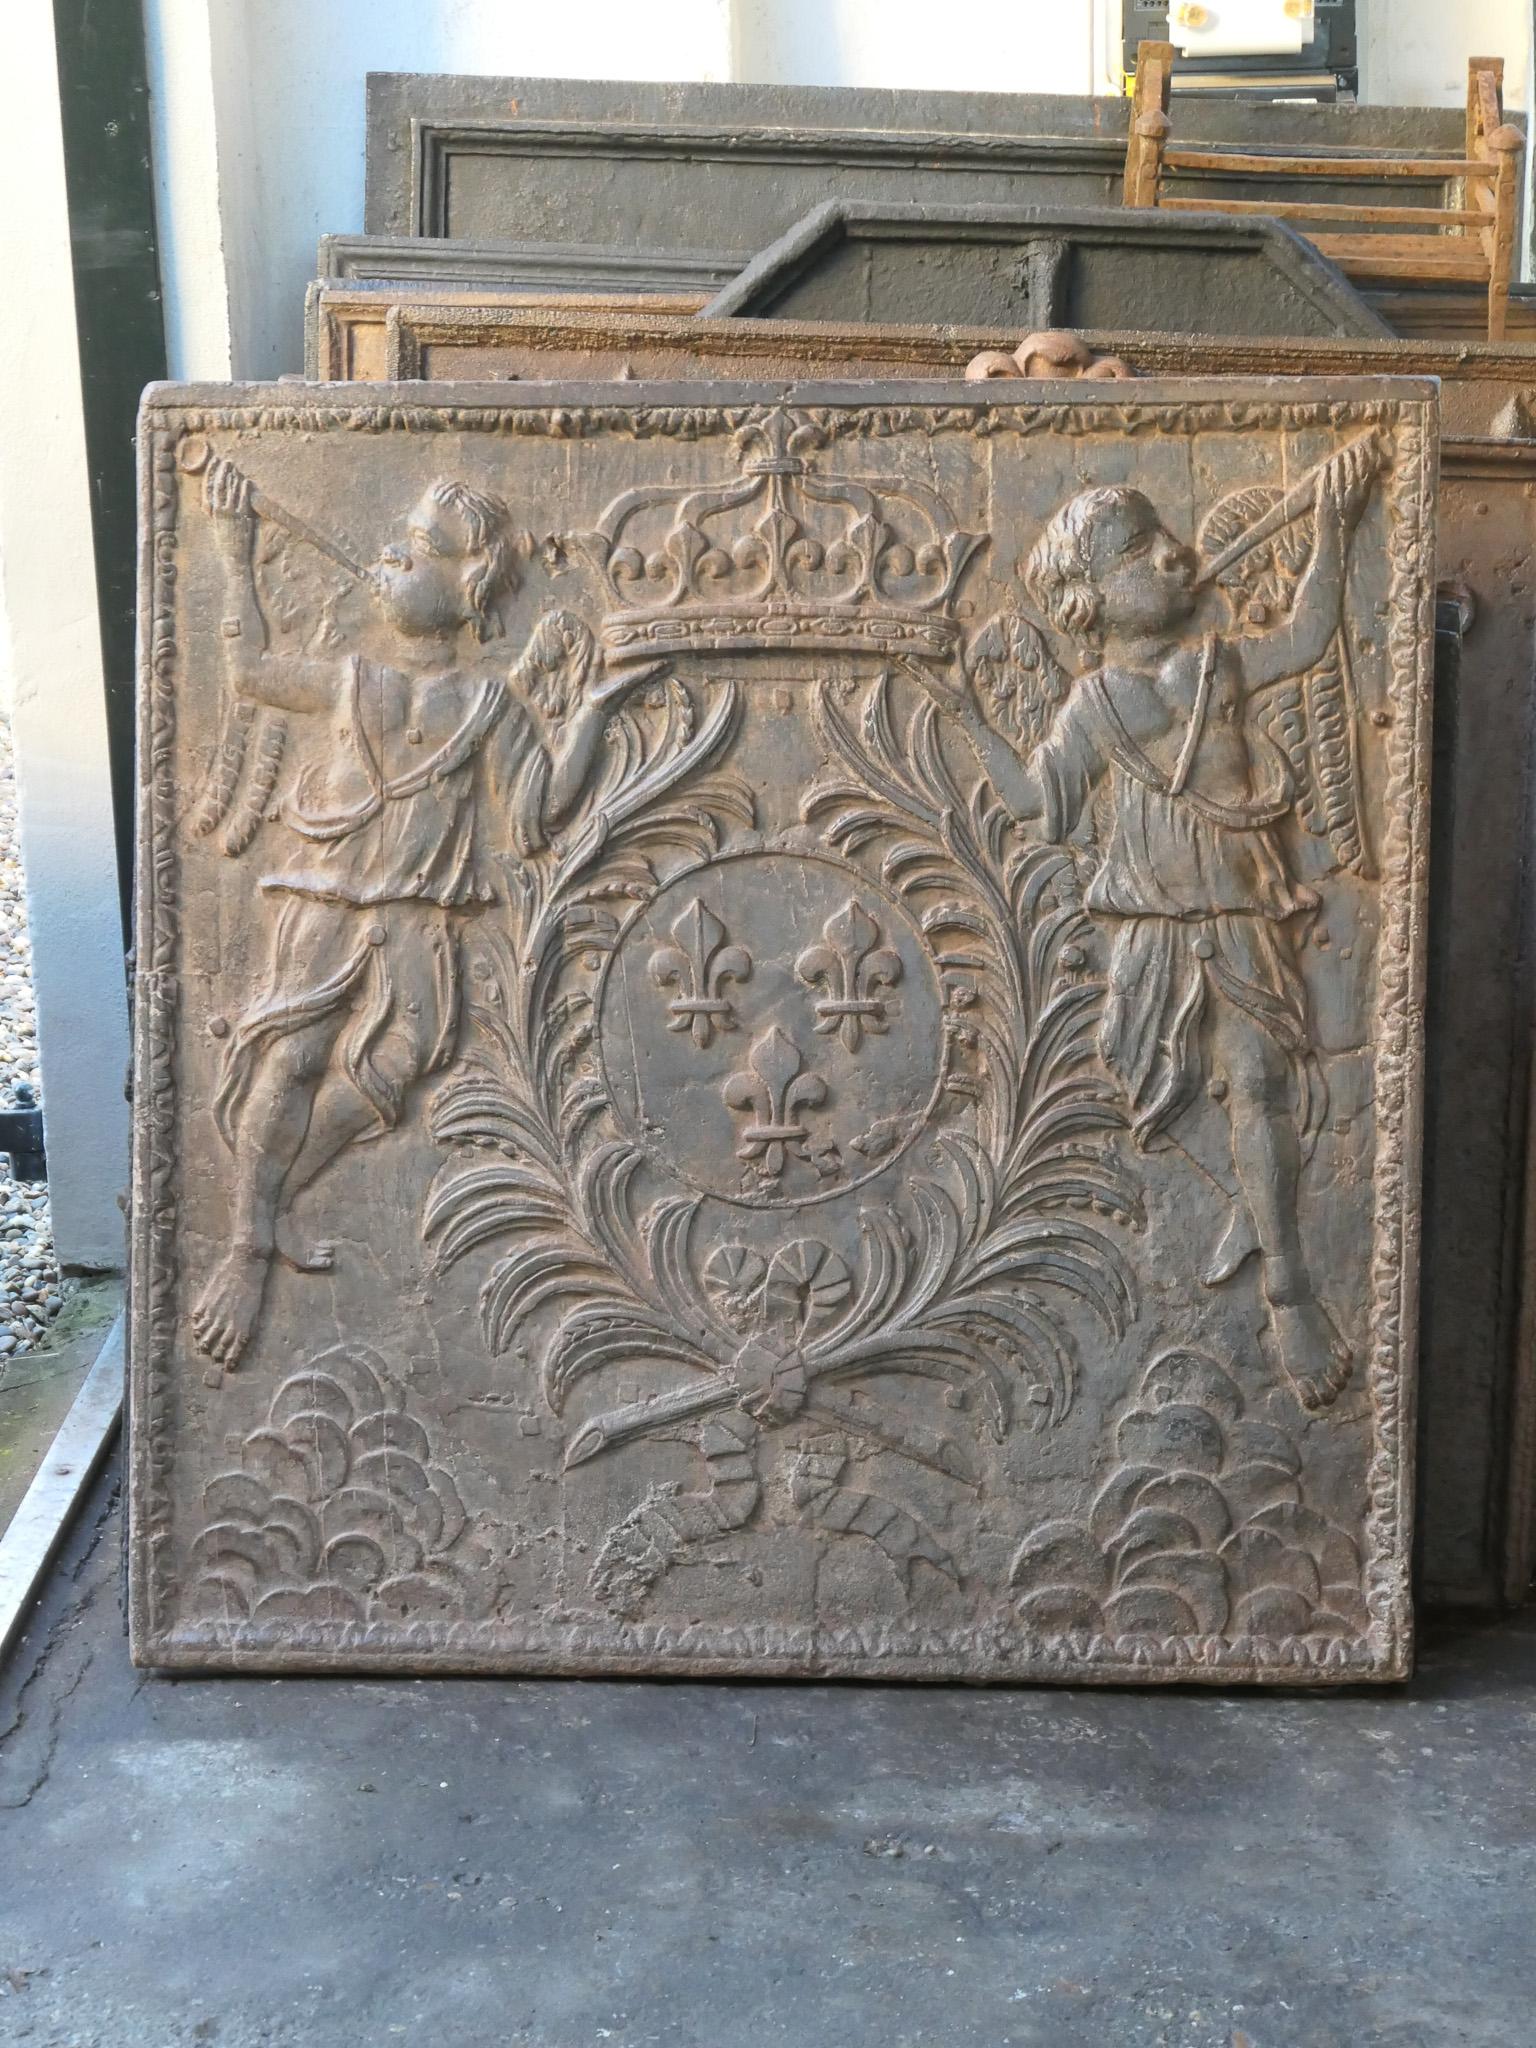 Beautiful 18th century French Louis XV fireback with the arms of France. This is the coat of arms of the House of Bourbon, an originally French royal house that became a major dynasty in Europe. It delivered kings for Spain (Navarra), France, both